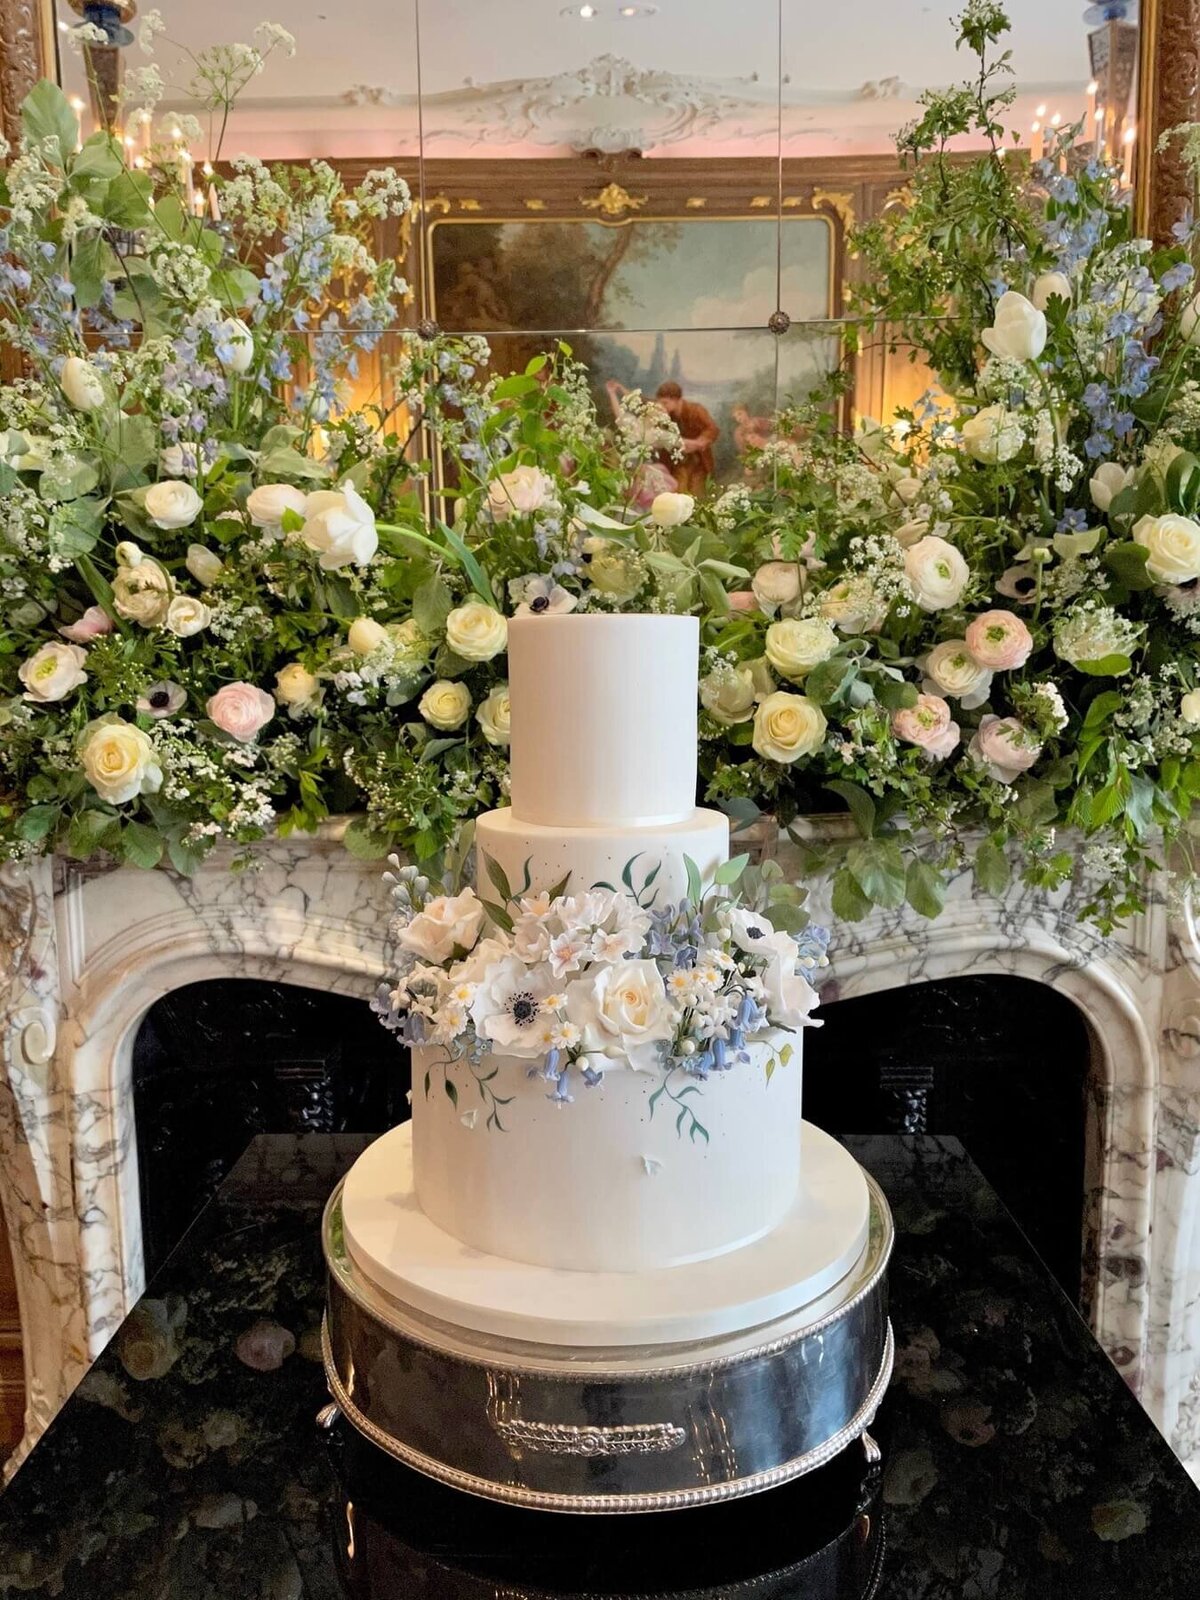 A three tiered cake with lots of sugar flowers in front of a fire place covered in flowers